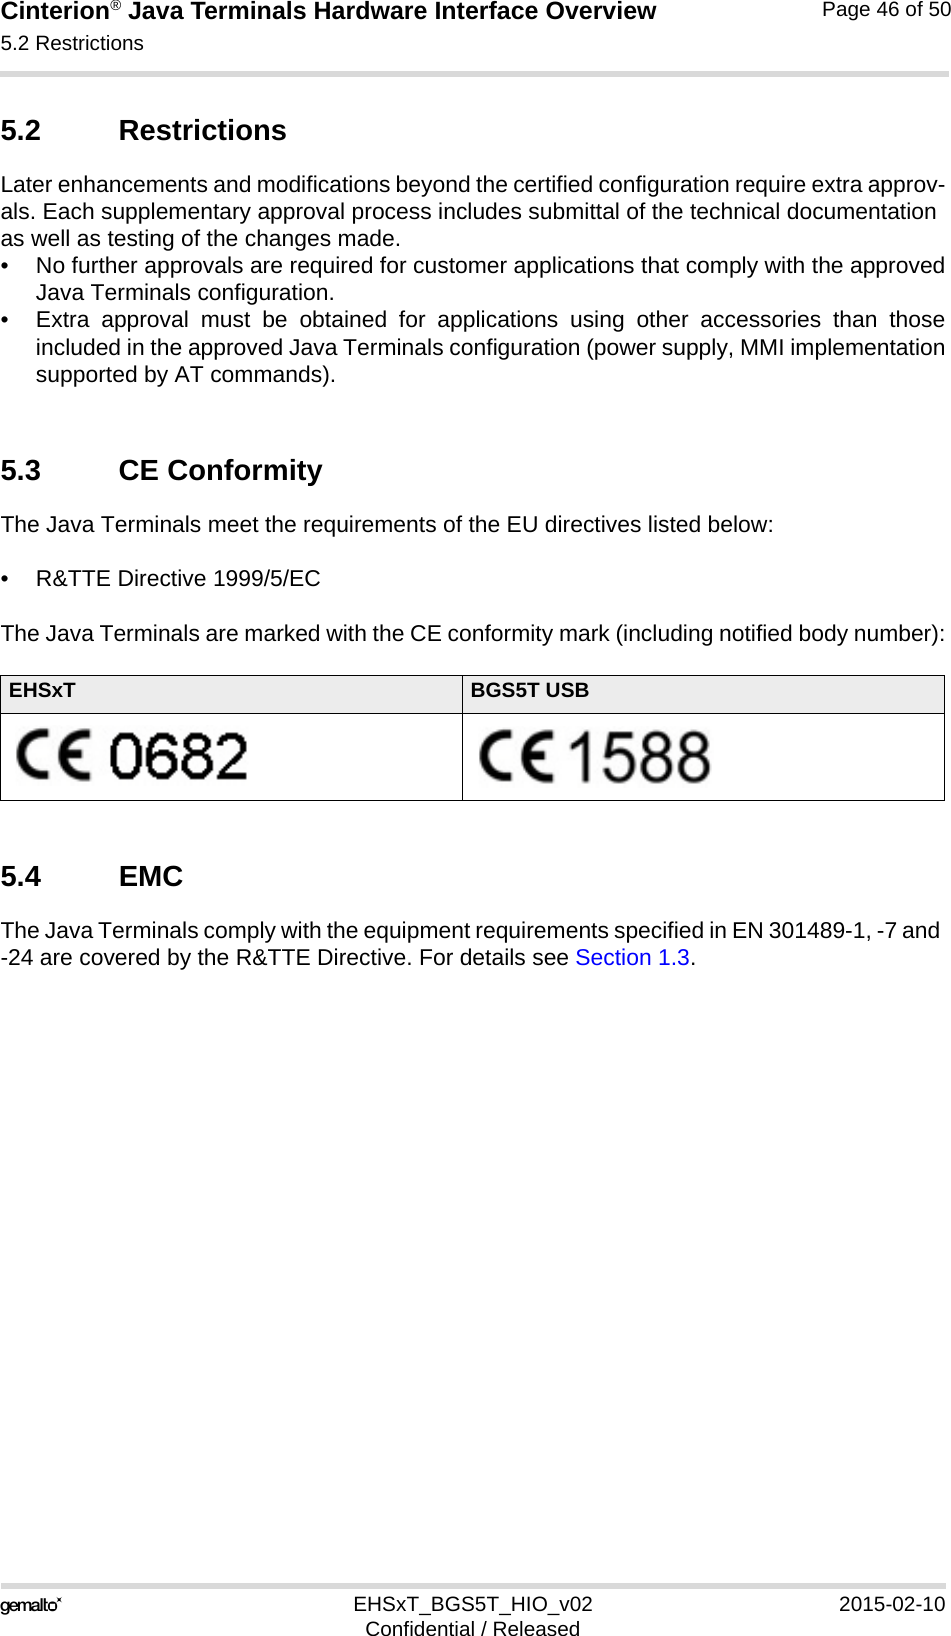 Cinterion® Java Terminals Hardware Interface Overview5.2 Restrictions48EHSxT_BGS5T_HIO_v02 2015-02-10Confidential / ReleasedPage 46 of 505.2 RestrictionsLater enhancements and modifications beyond the certified configuration require extra approv-als. Each supplementary approval process includes submittal of the technical documentation as well as testing of the changes made. • No further approvals are required for customer applications that comply with the approvedJava Terminals configuration. • Extra approval must be obtained for applications using other accessories than thoseincluded in the approved Java Terminals configuration (power supply, MMI implementationsupported by AT commands). 5.3 CE ConformityThe Java Terminals meet the requirements of the EU directives listed below:• R&amp;TTE Directive 1999/5/EC The Java Terminals are marked with the CE conformity mark (including notified body number):5.4 EMCThe Java Terminals comply with the equipment requirements specified in EN 301489-1, -7 and -24 are covered by the R&amp;TTE Directive. For details see Section 1.3.EHSxT BGS5T USB